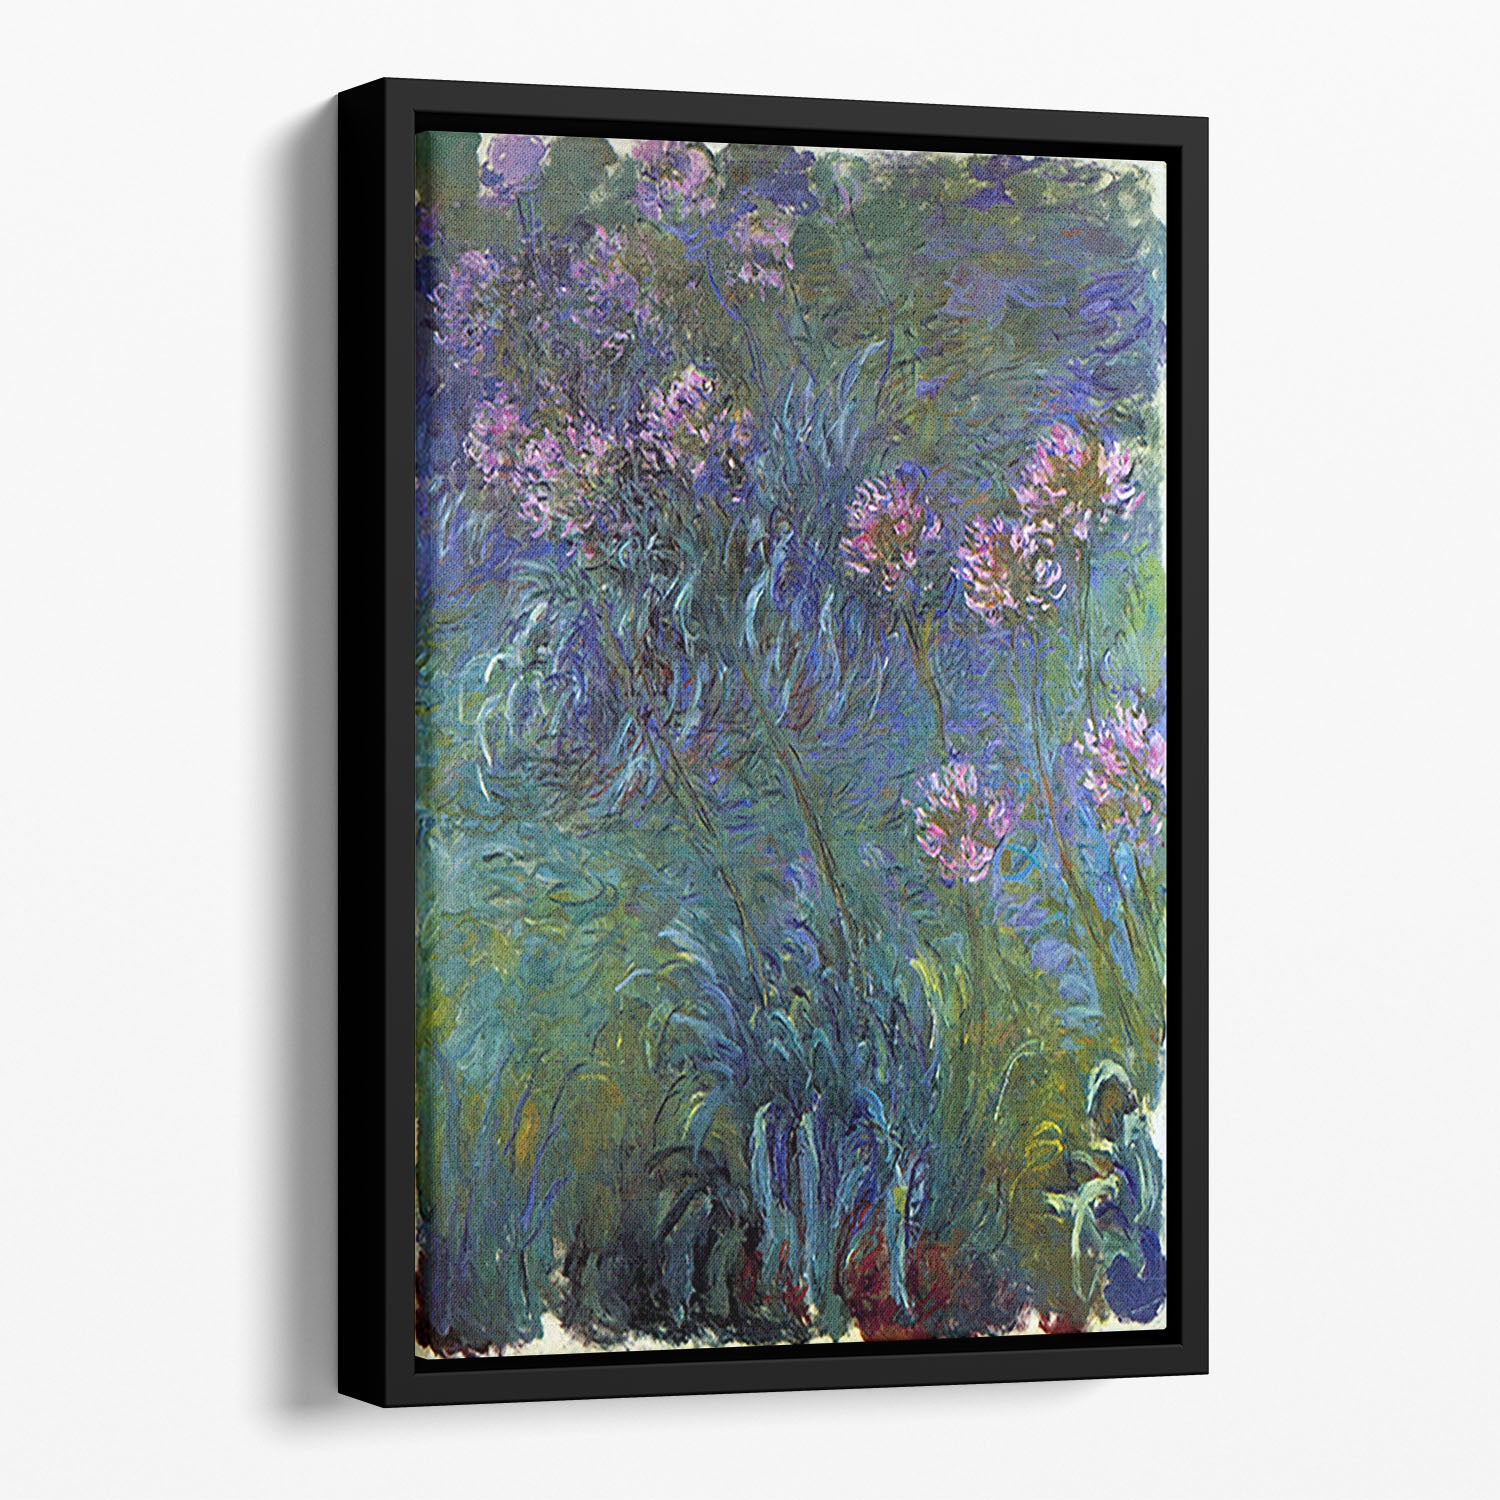 Jewelry lilies by Monet Floating Framed Canvas